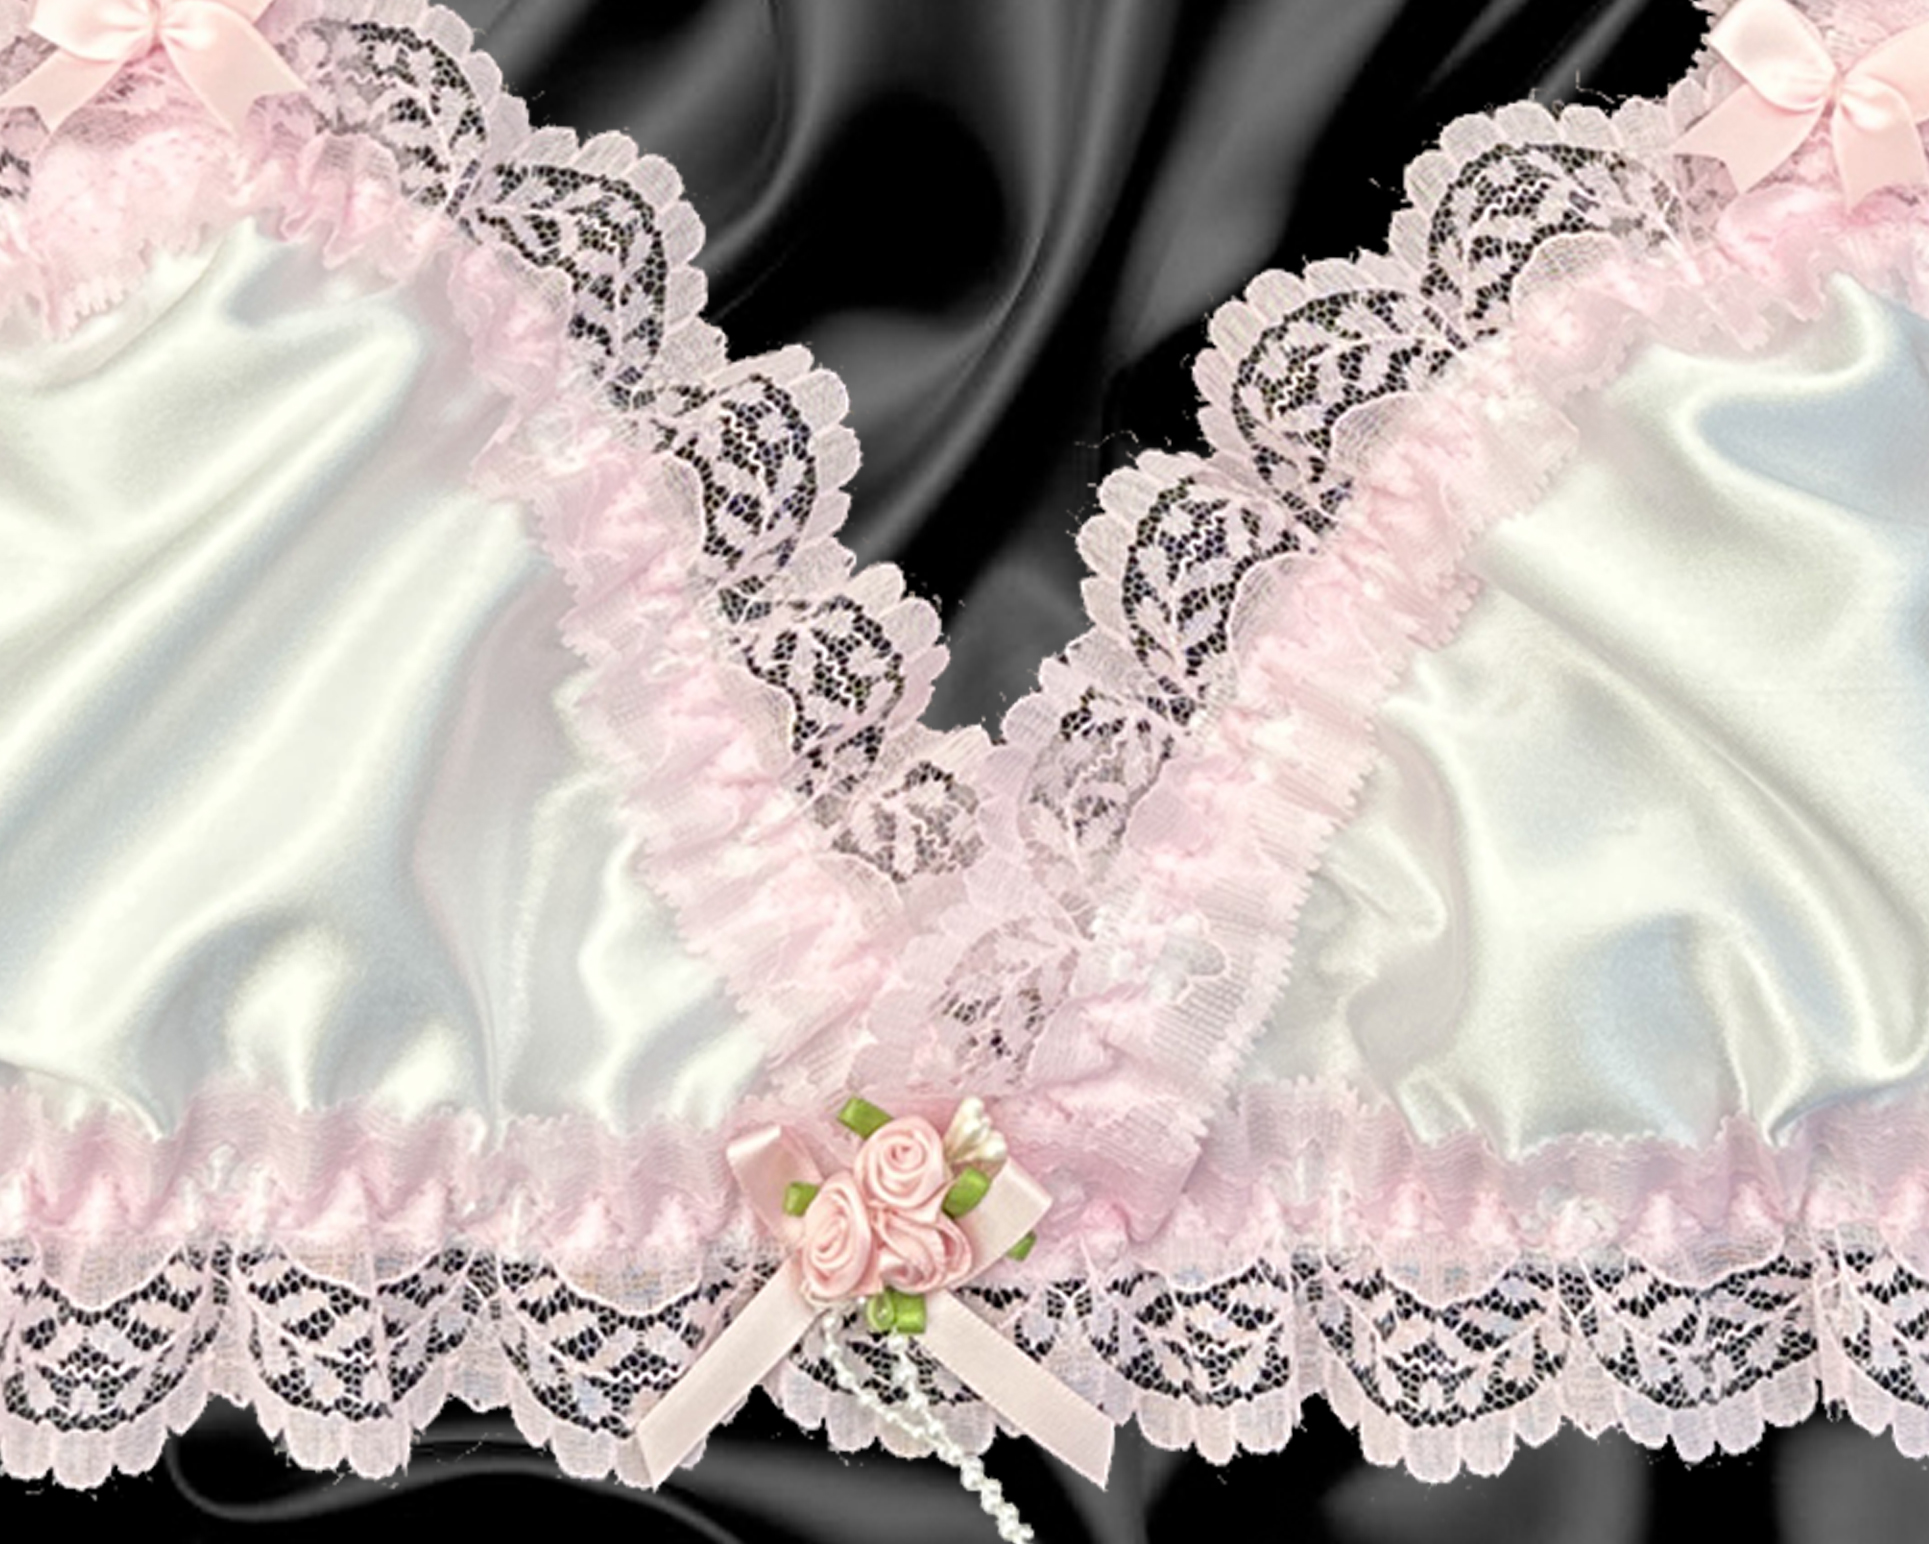 Sissy Satin Frilly Lacy Fitted Pull On Bra Bralette Roses Pearls Bows CD TV  DRAG